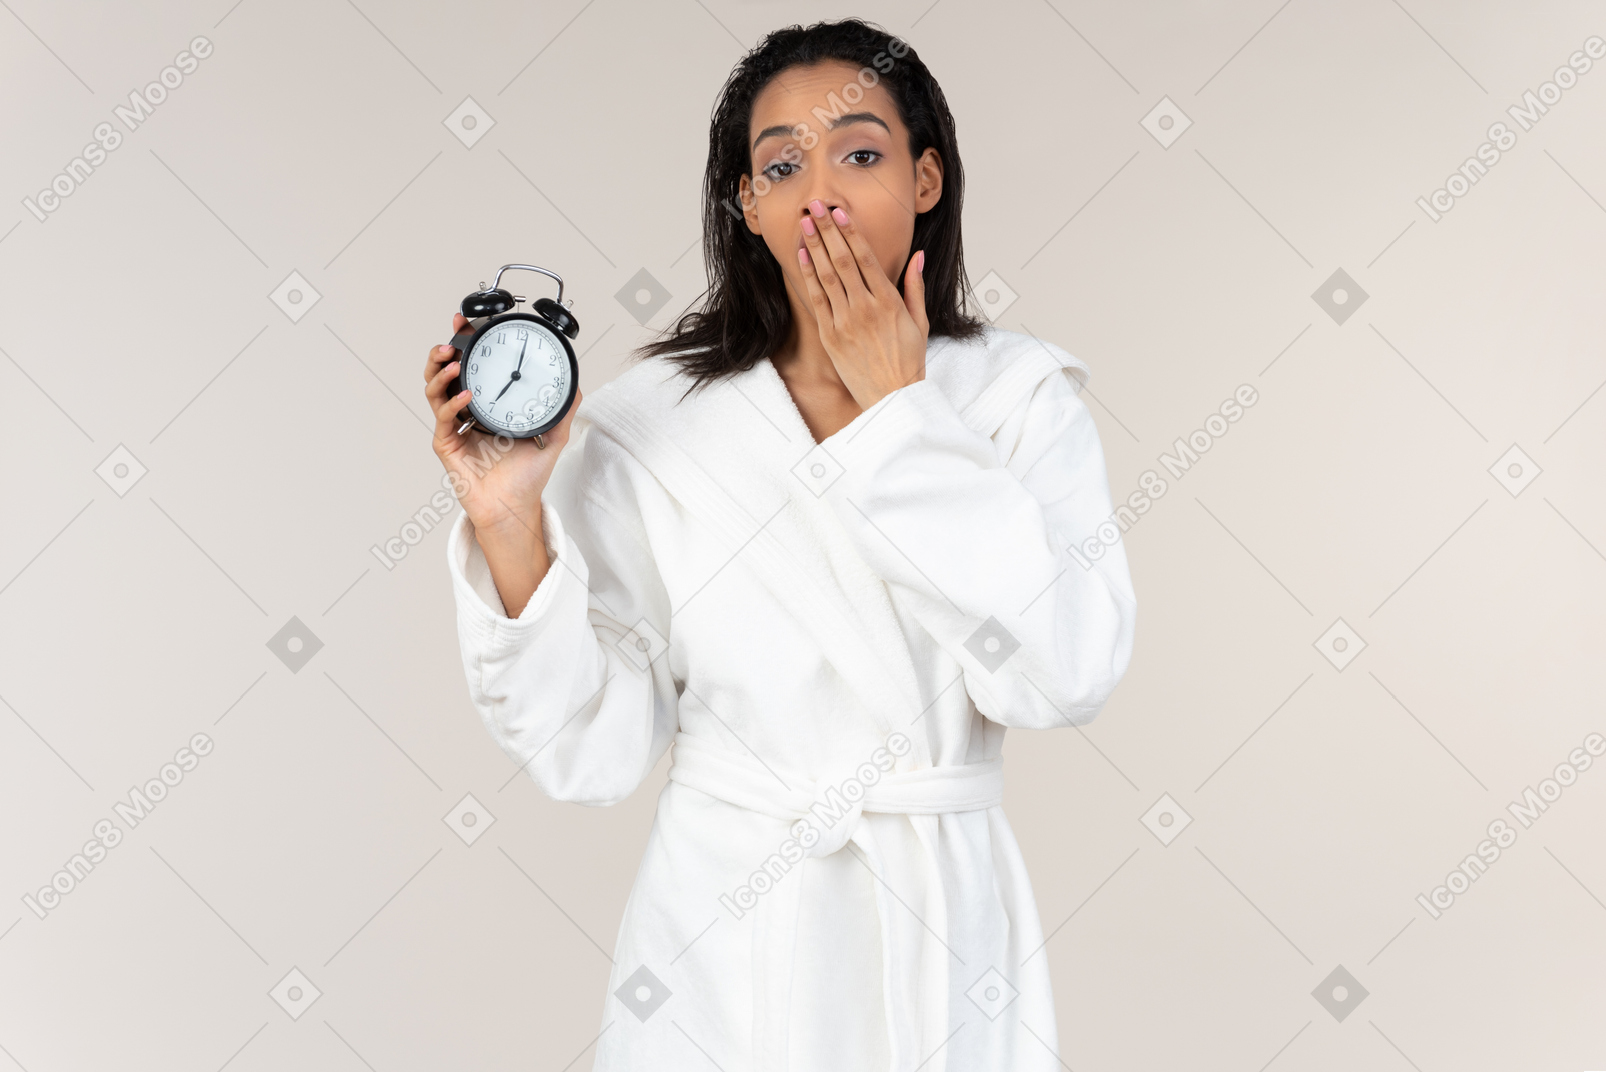 Black woman in white bathrobe going about her morning routine